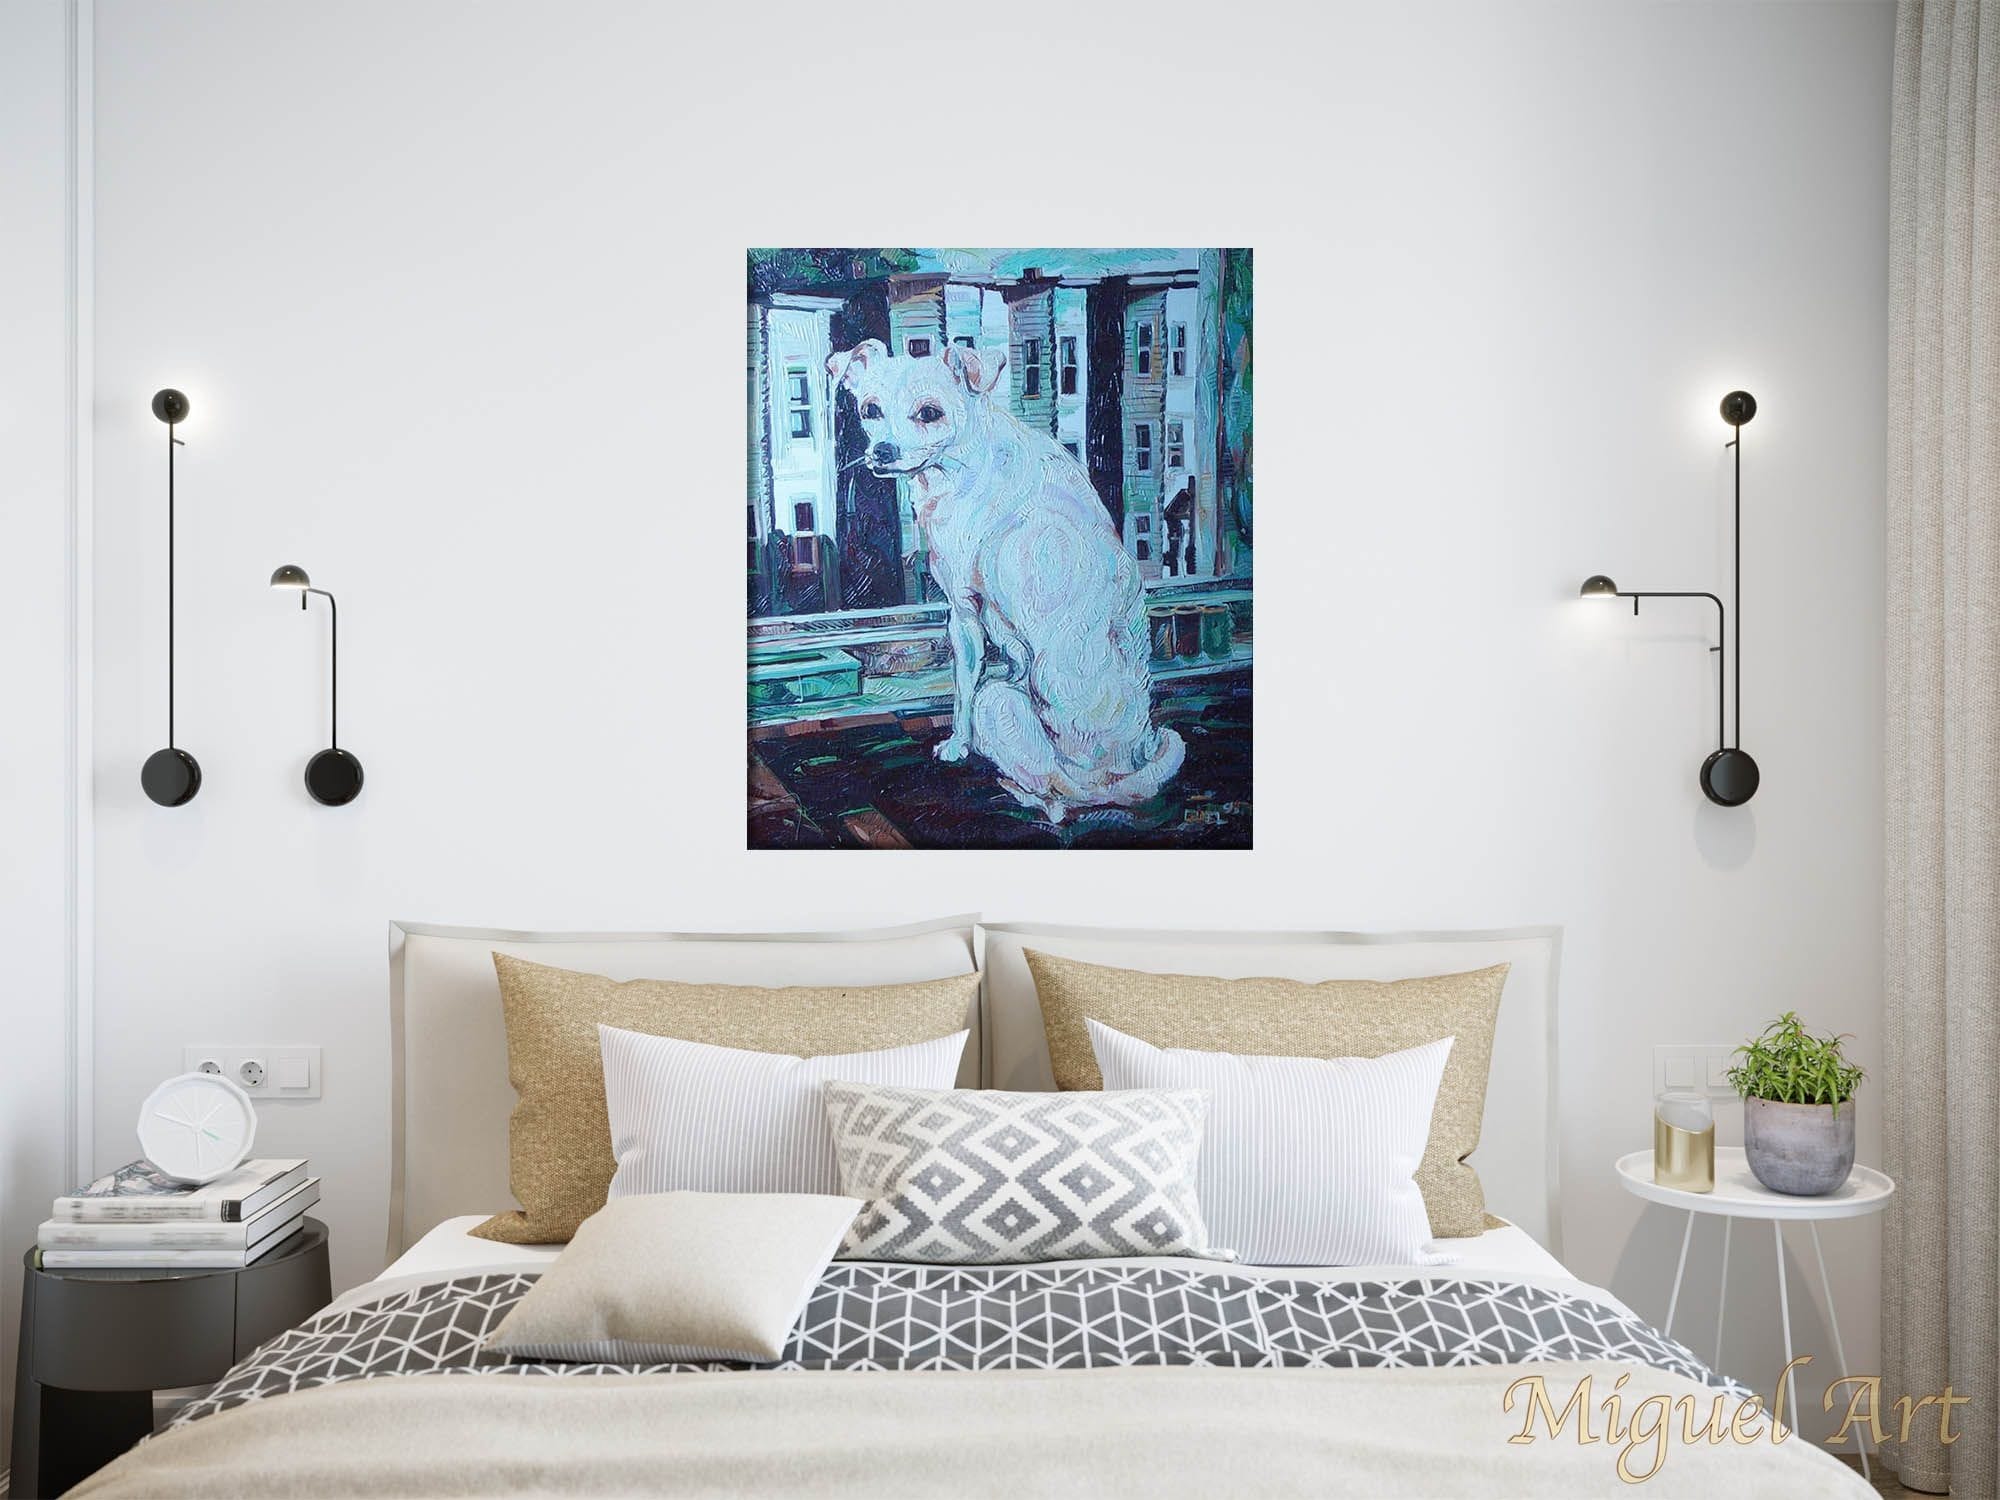 Painting of Spy displayed on a white wall in a bedroom